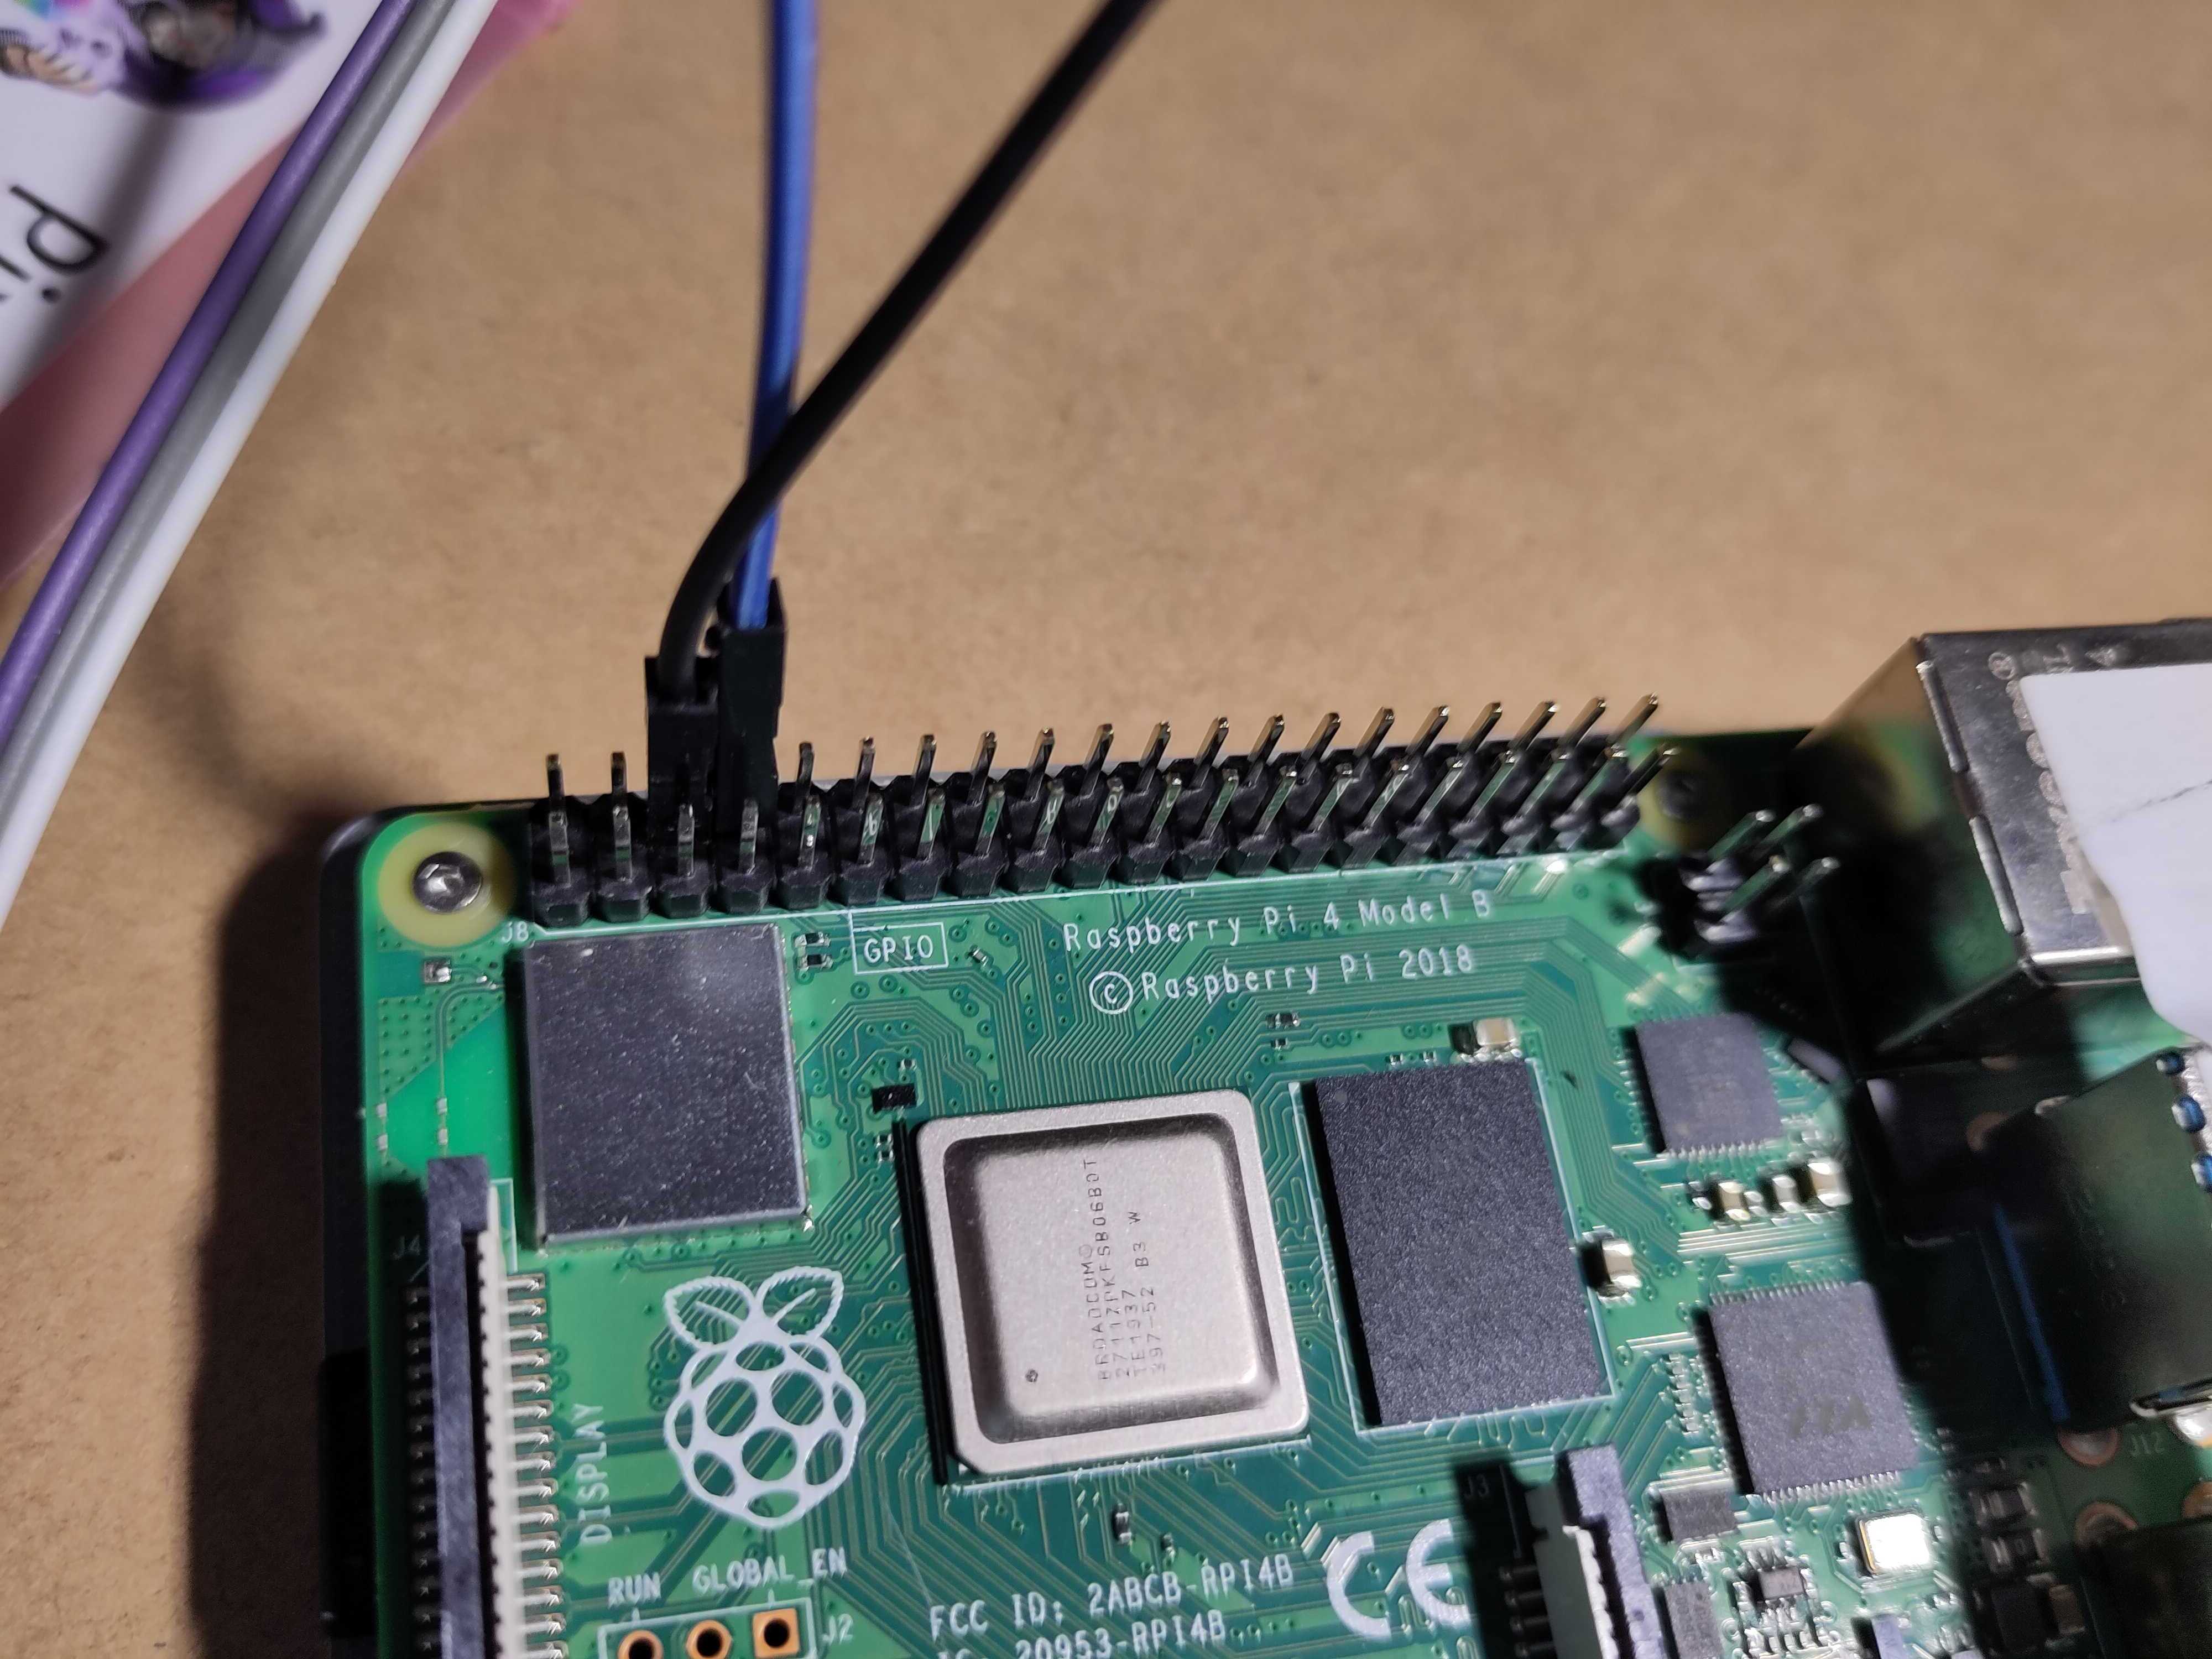 Connections on the Raspberry Pi